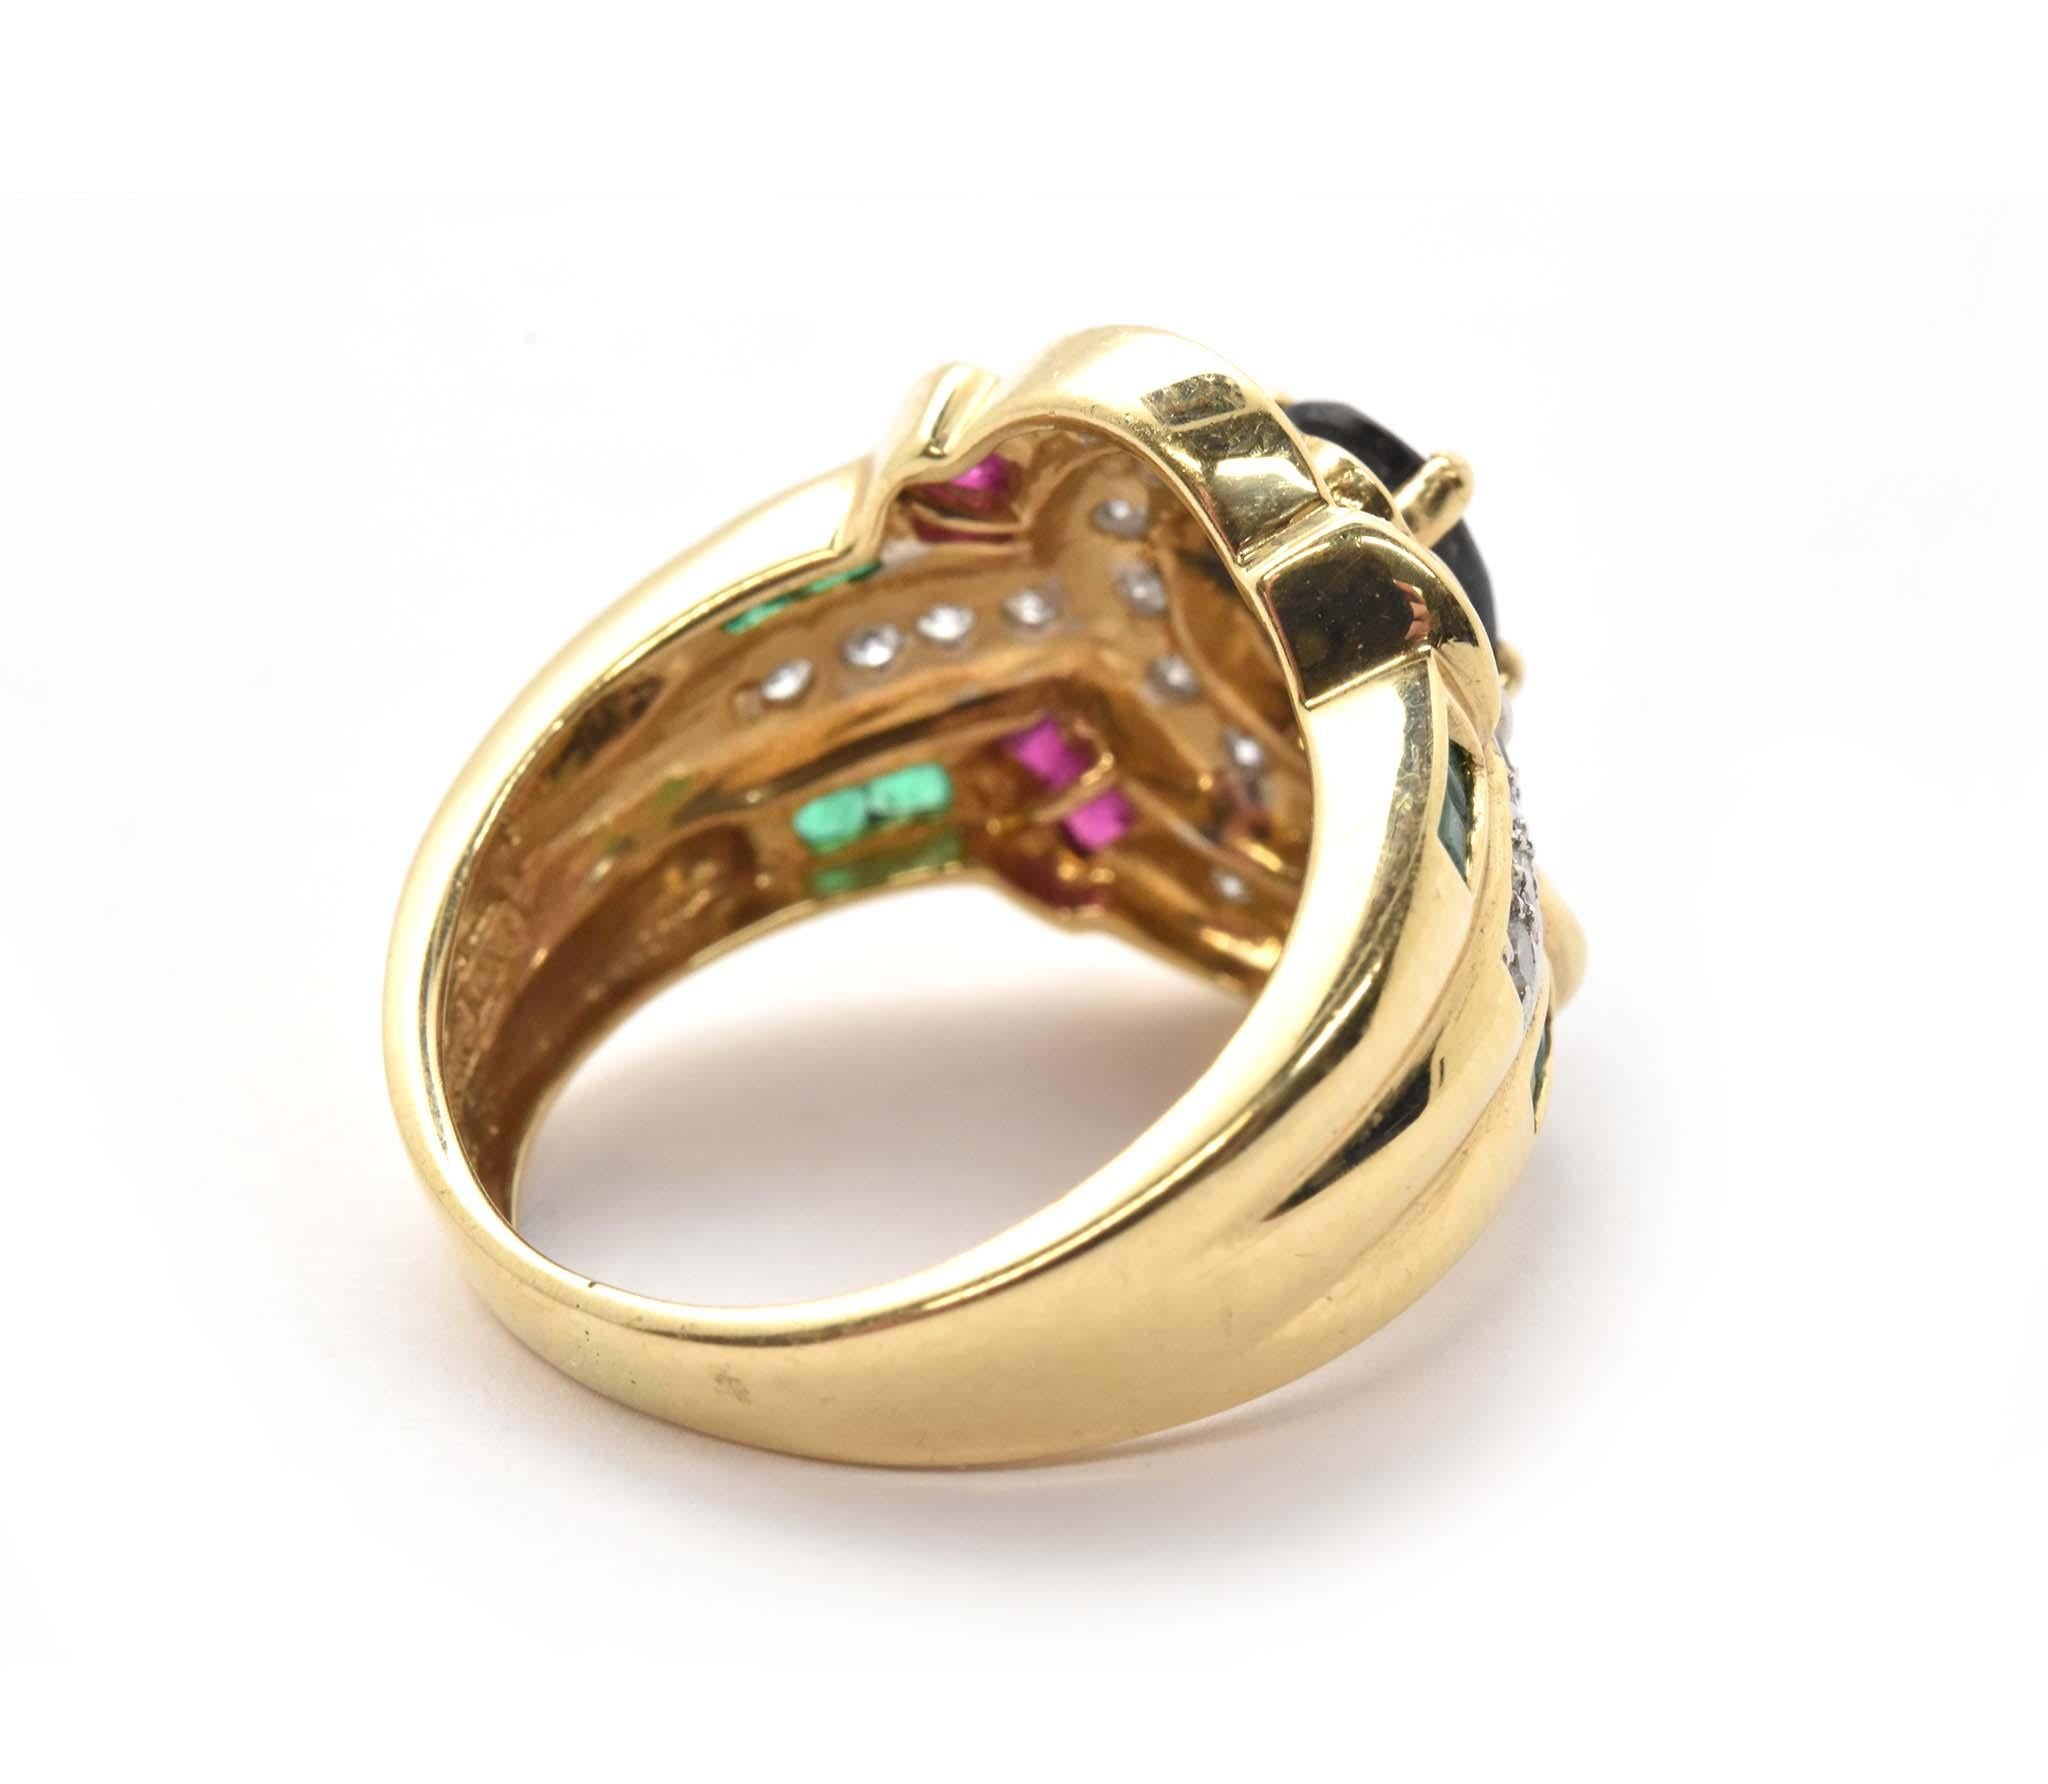 This ring is made in 14k yellow gold, and it holds an oval sapphire at its center. The stone measures 7×5.2mm. The sapphire is surrounded by small round diamonds along with ruby and emerald accents for a splash of color. The diamonds have a total